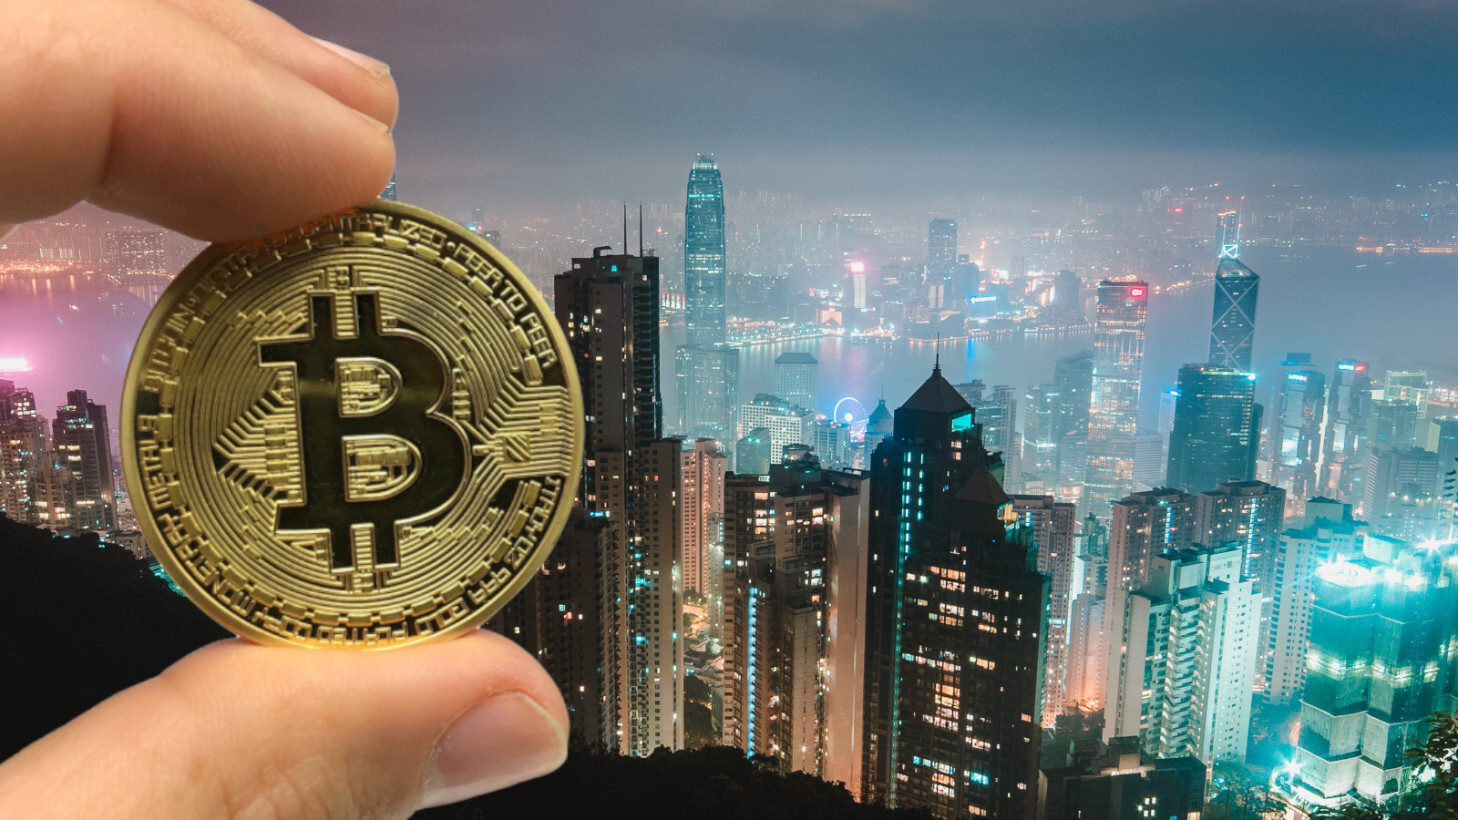 Hong Kong: Bitcoin ‘millionaire’ throws money from rooftop, gets arrested